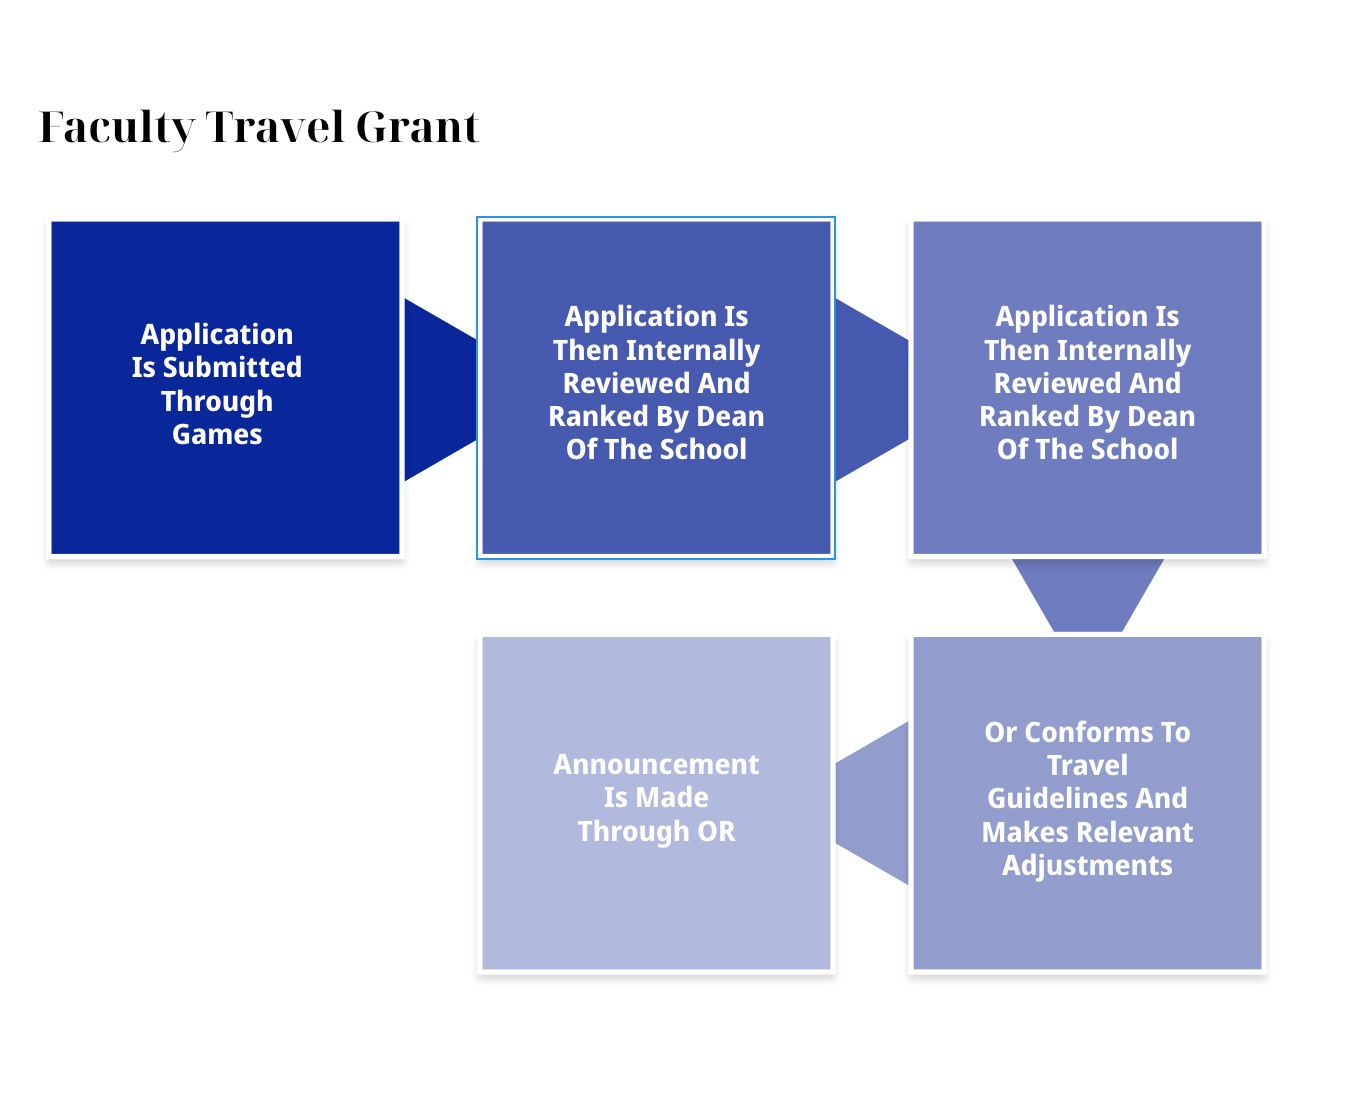 OR - Routing of a Travel Grant